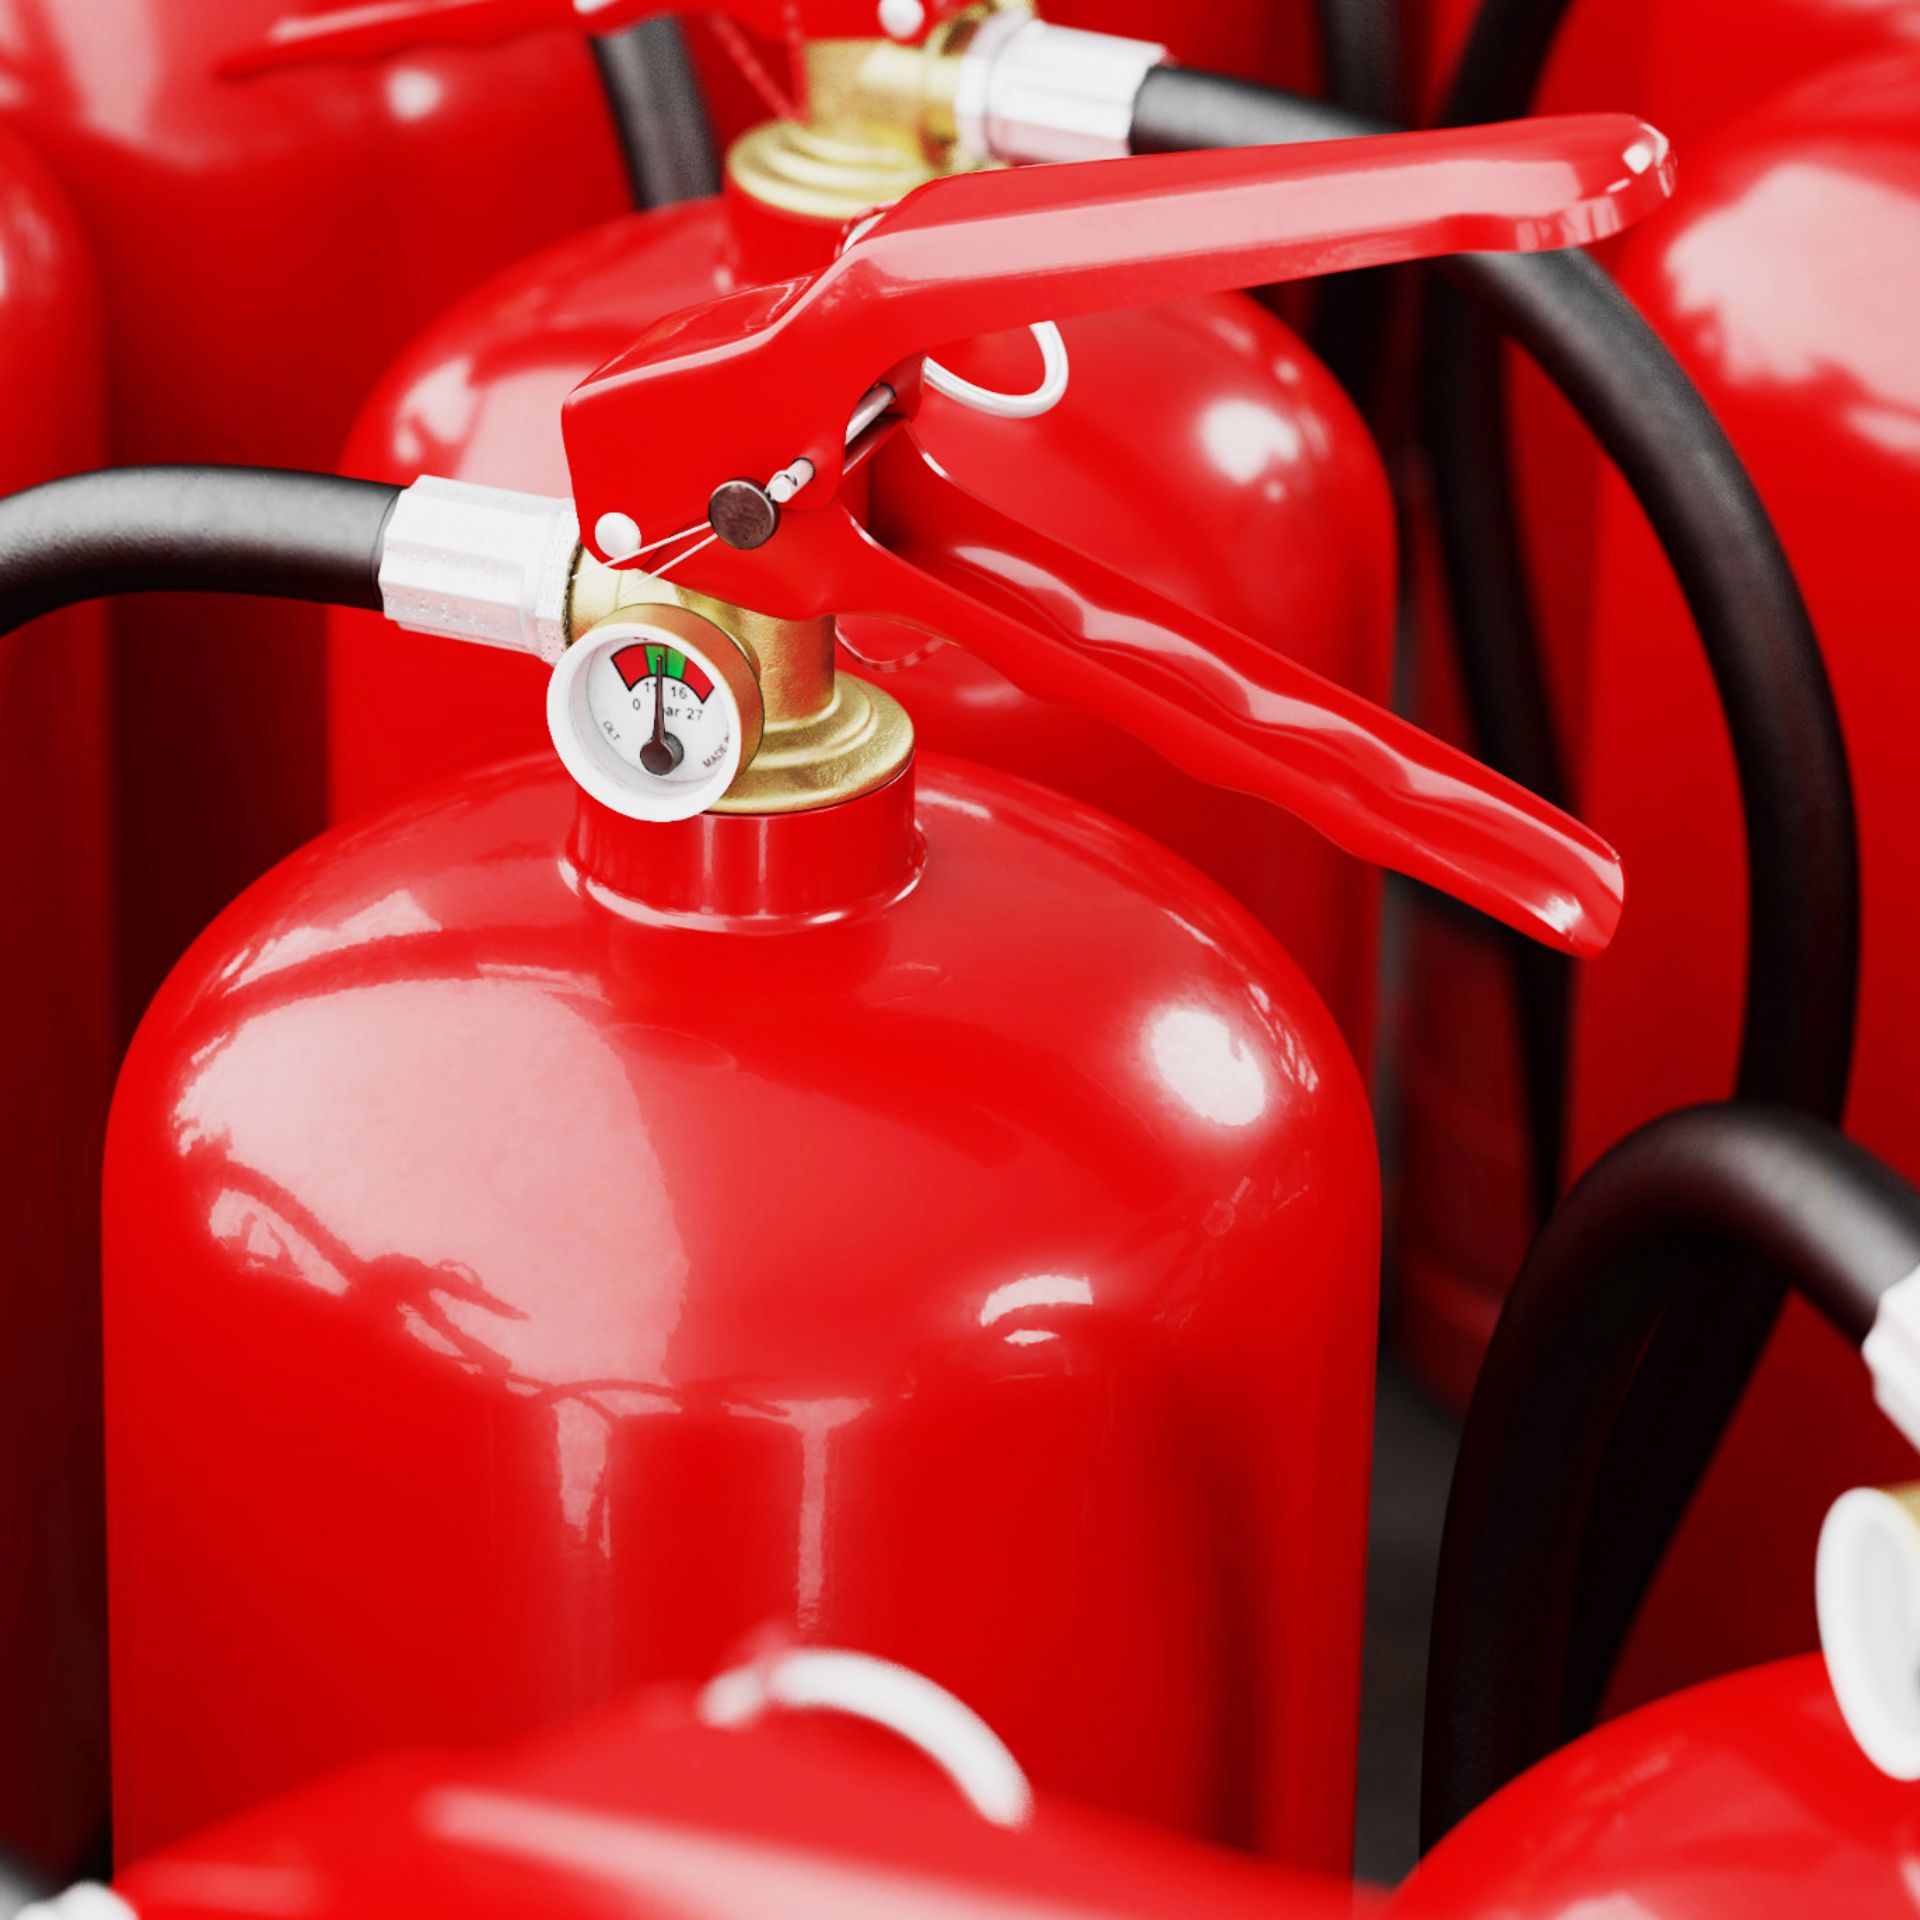 Which Fire Extinguisher should NOT be used on Flammable Liquids?